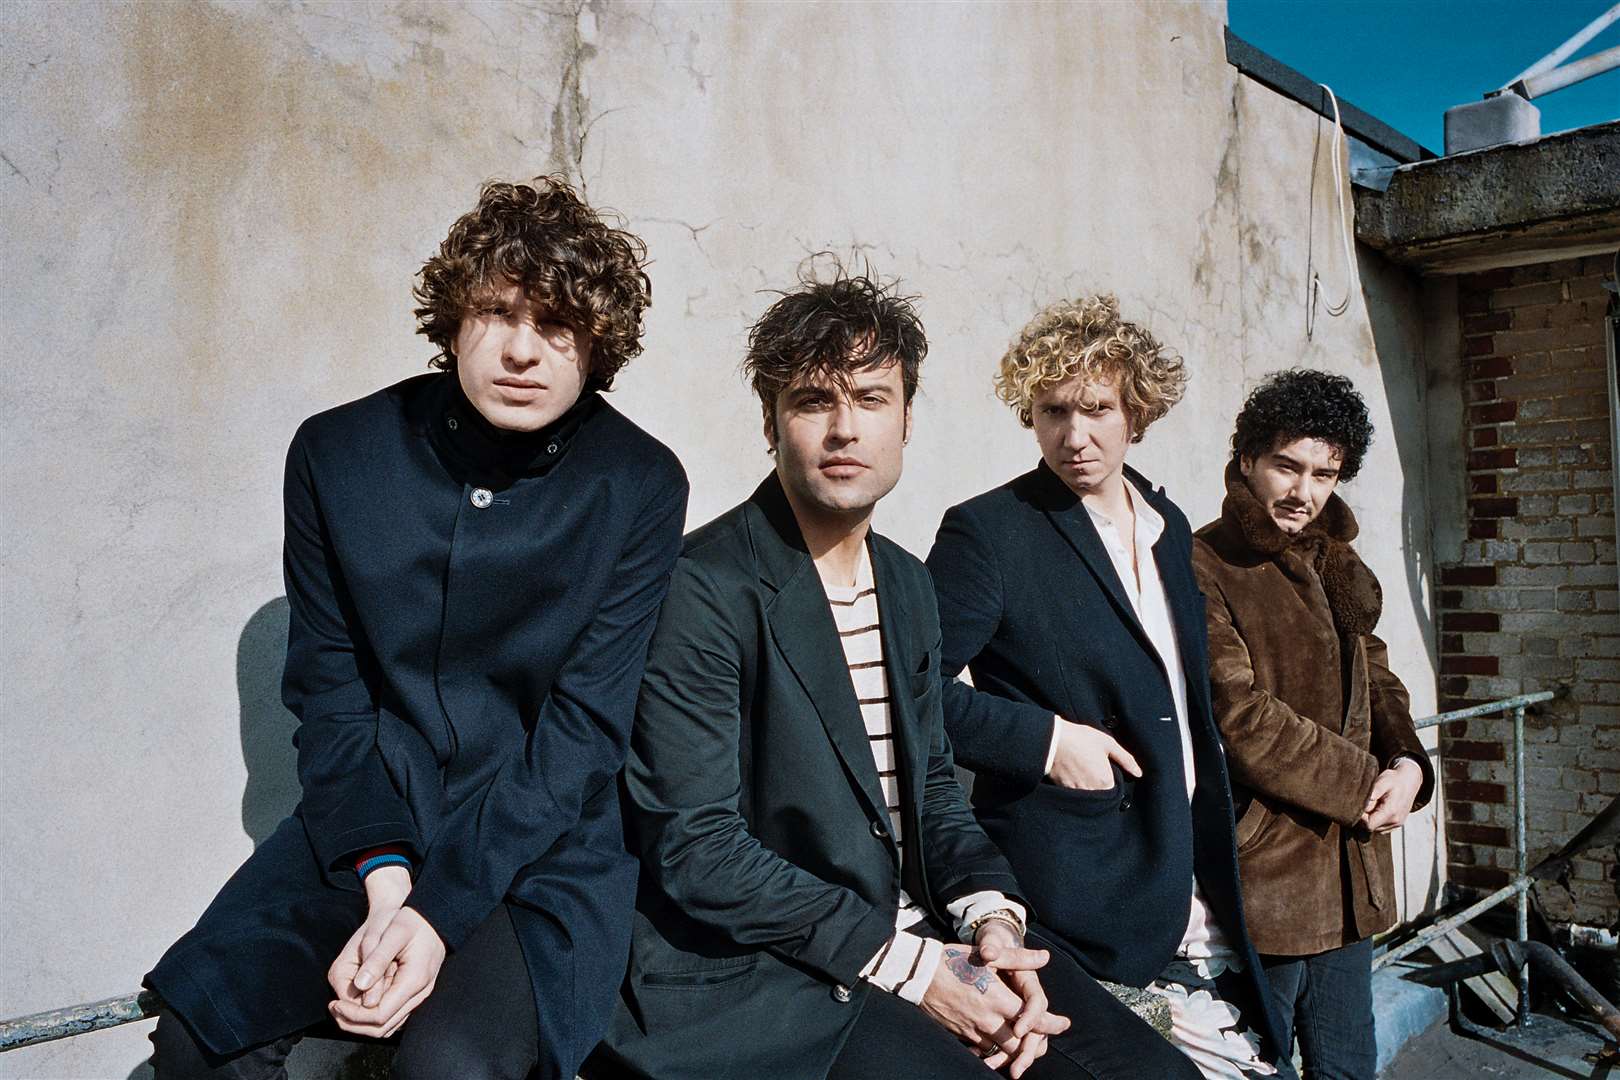 The Kooks will perform in Folkestone on their forthcoming UK tour